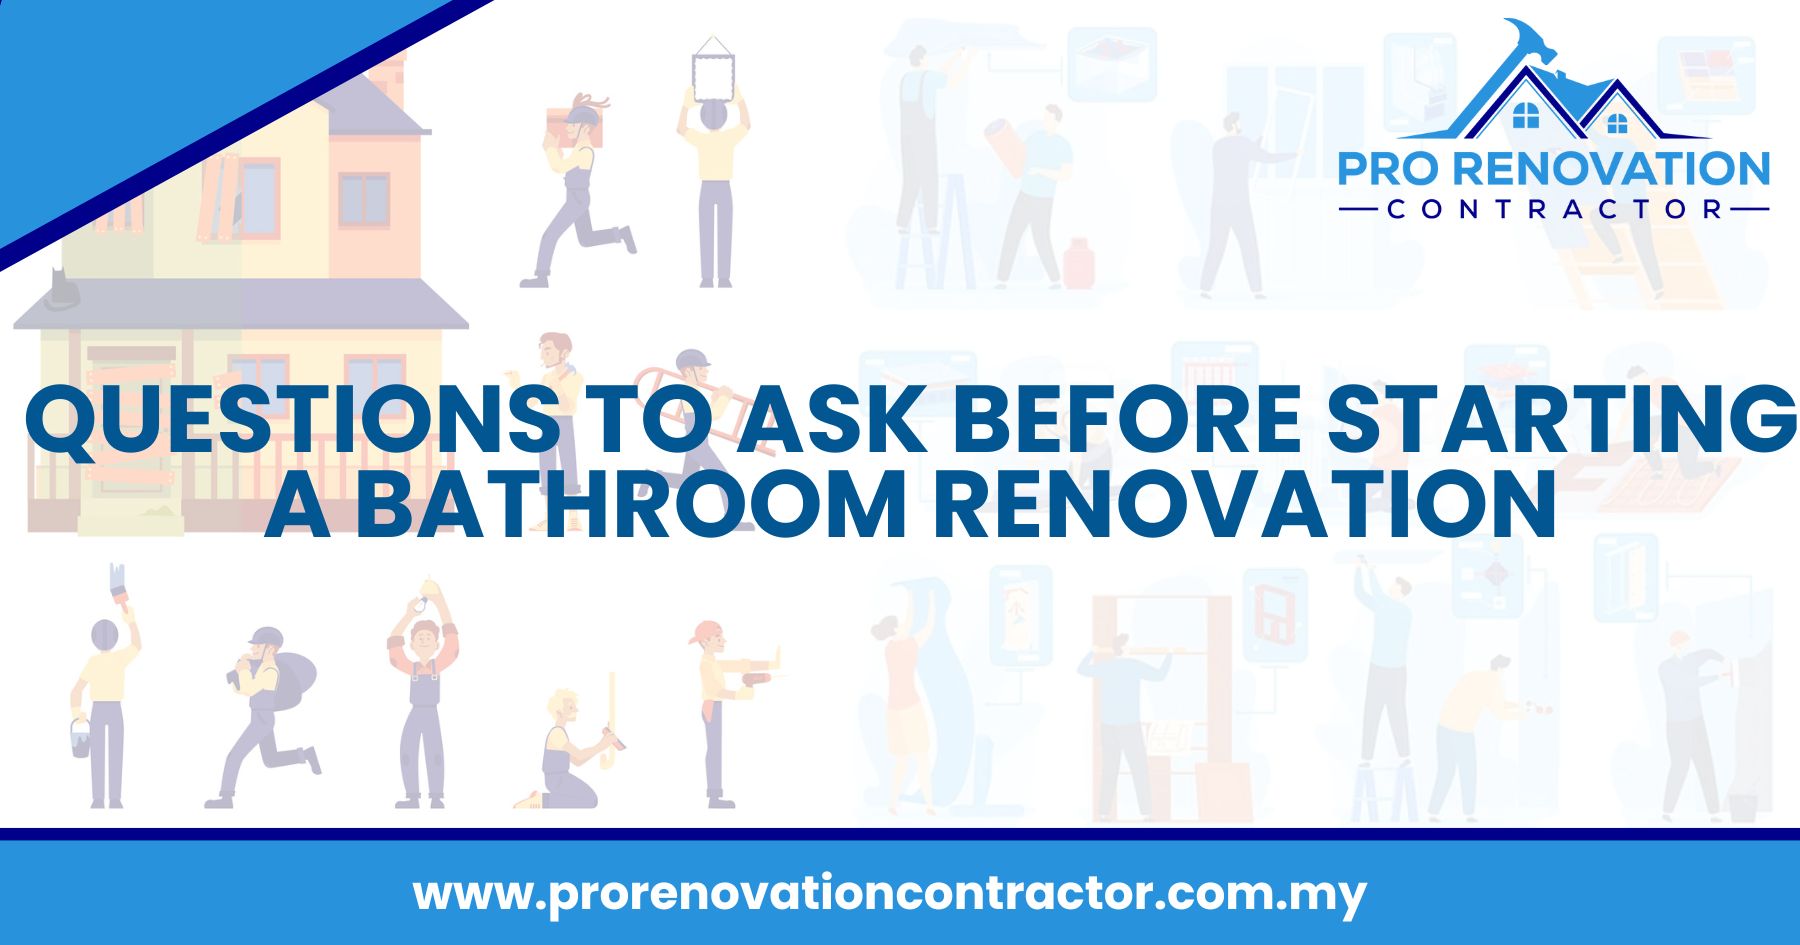 Questions to Ask Before Starting a Bathroom Renovation